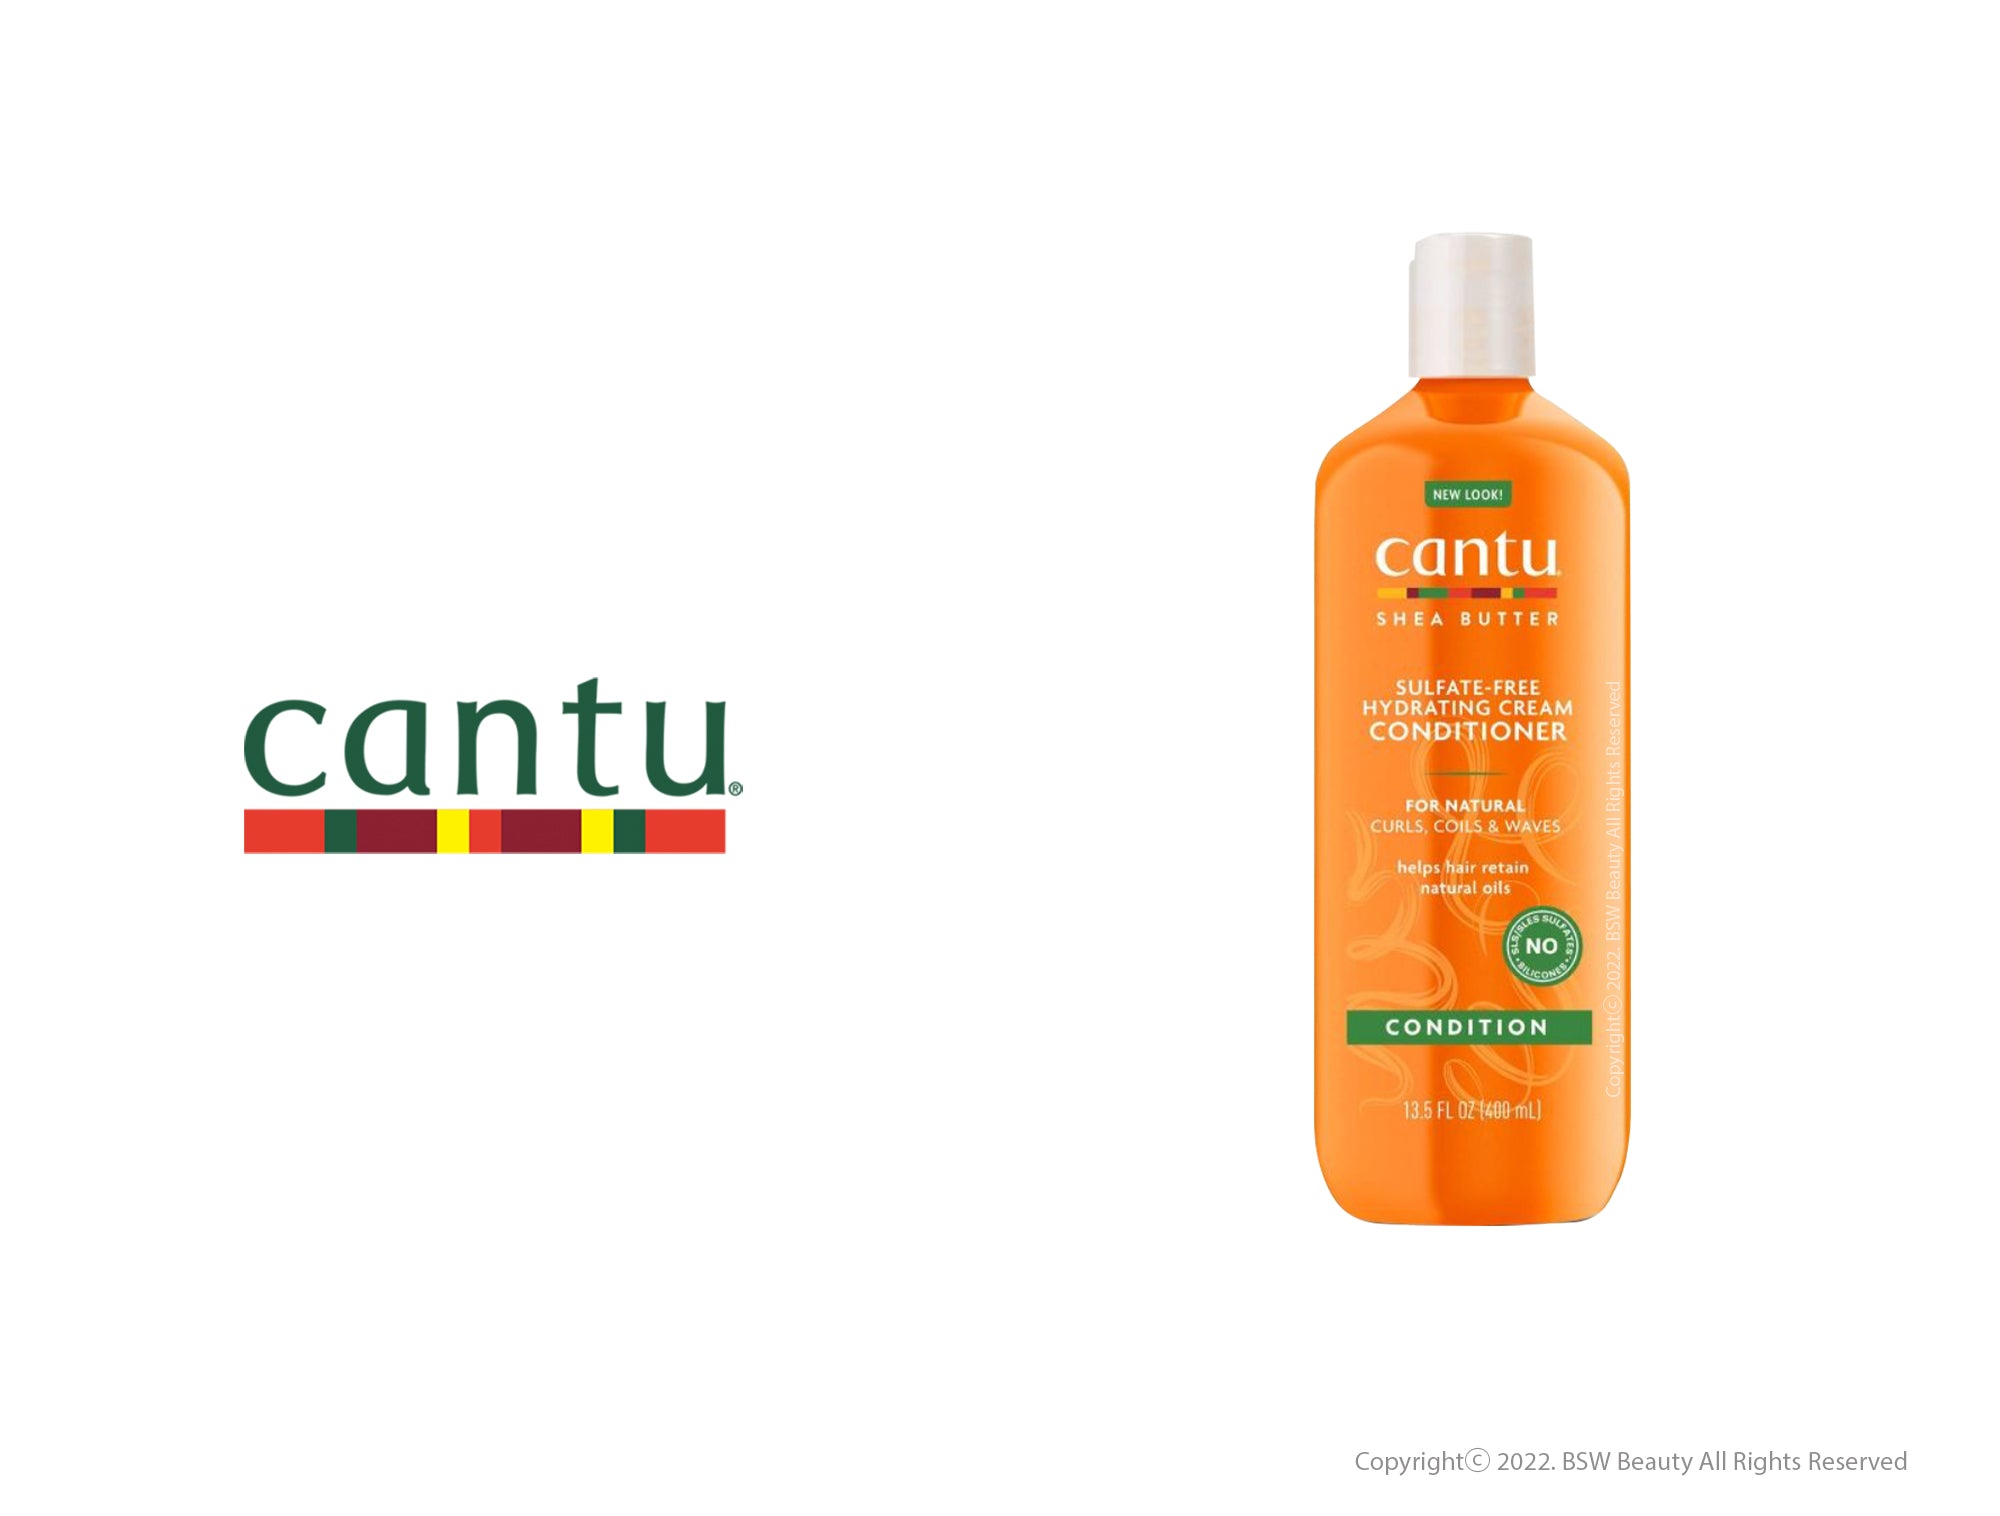 CANTU FOR NATURAL HAIR SULFATE-FREE HYDRATING CREAM CONDITIONER 13.5oz